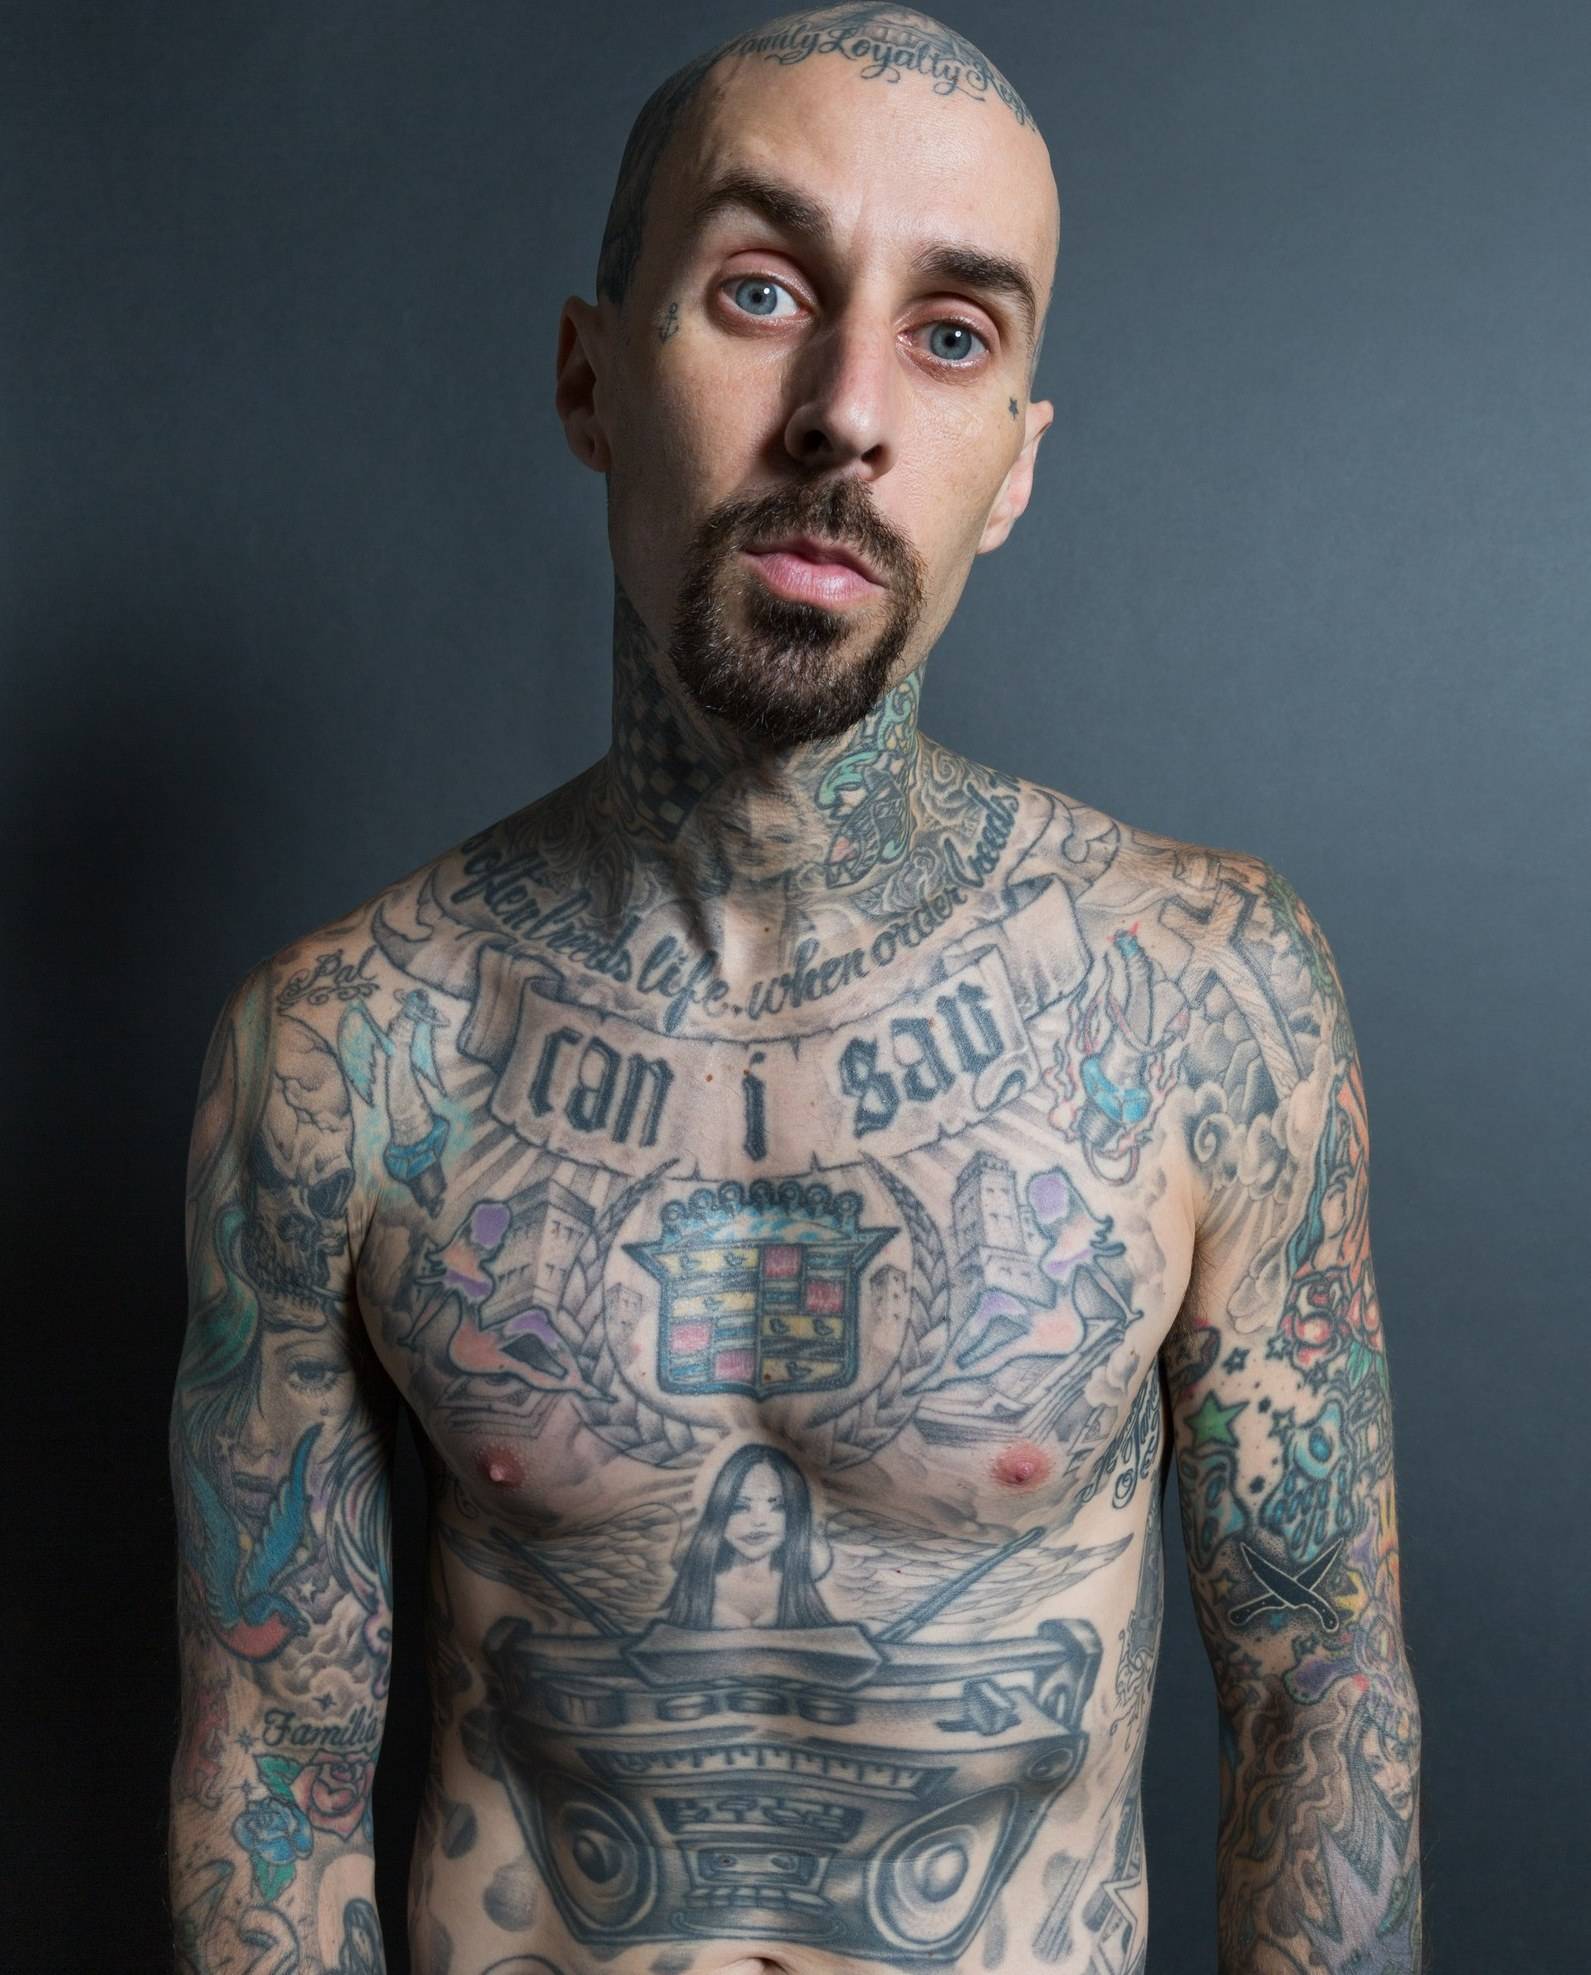 Travis barker's mother gave him his first drum kit at age four. 